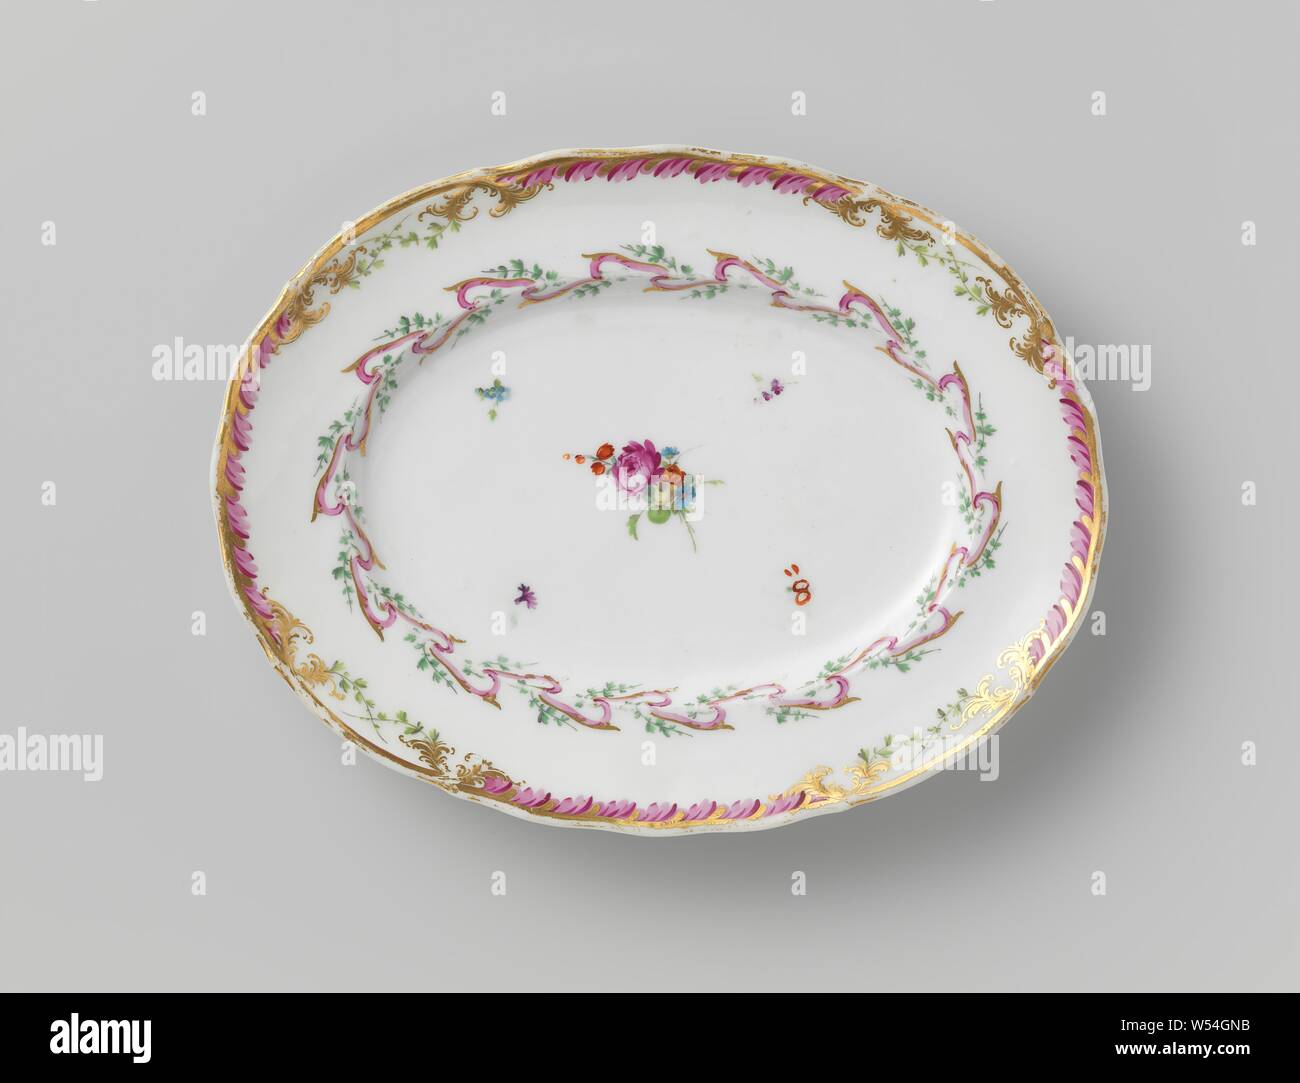 Saucer dish, associated with a service with garlanded ribbon motif with leaves, flower bouquets and sprinkled flower branchesm, originally two, associated with a porcelain service with garlanded ribbon motif in purple and gold with green leaves, flower bouquets and scattered flower branches. Borders slightly corrugated with decoration in gold with a purple leaf motif between which green crossed leaf motif. Marked: M.O.L. and Amstel. Remark: second dish was handed over in 1948 to the International Museum of Ceramics in Faenza., Manufactuur Oud-Loosdrecht, Amsterdam, 1780 - in or before 1820 Stock Photo